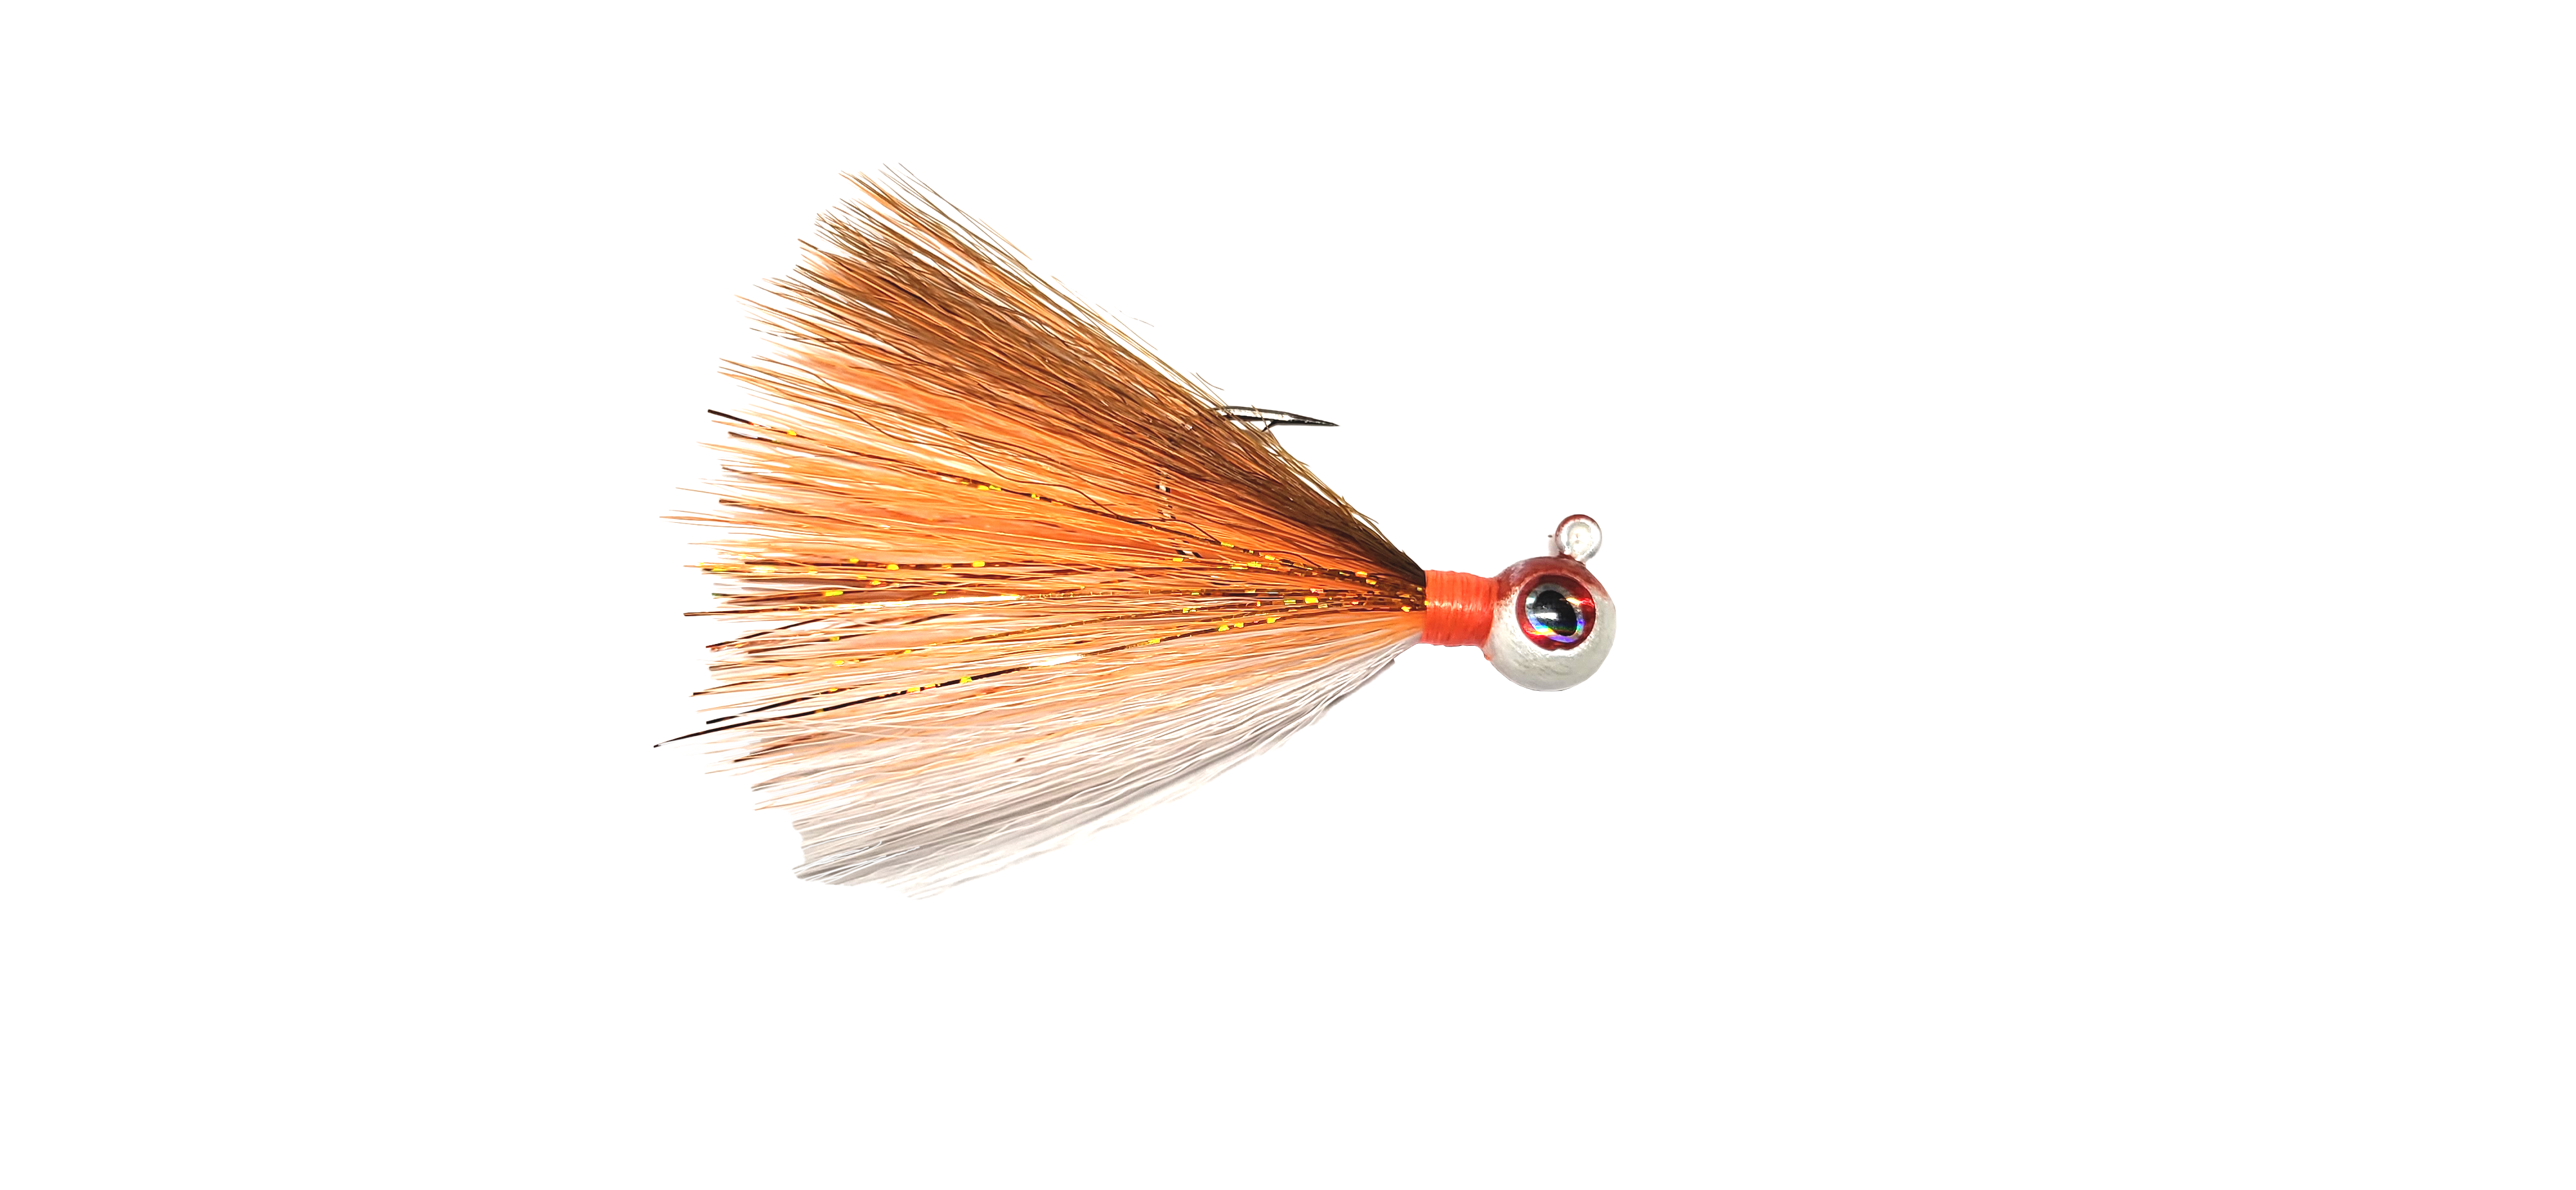 S&S Bucktails - Big Eye Lure w/Rattle